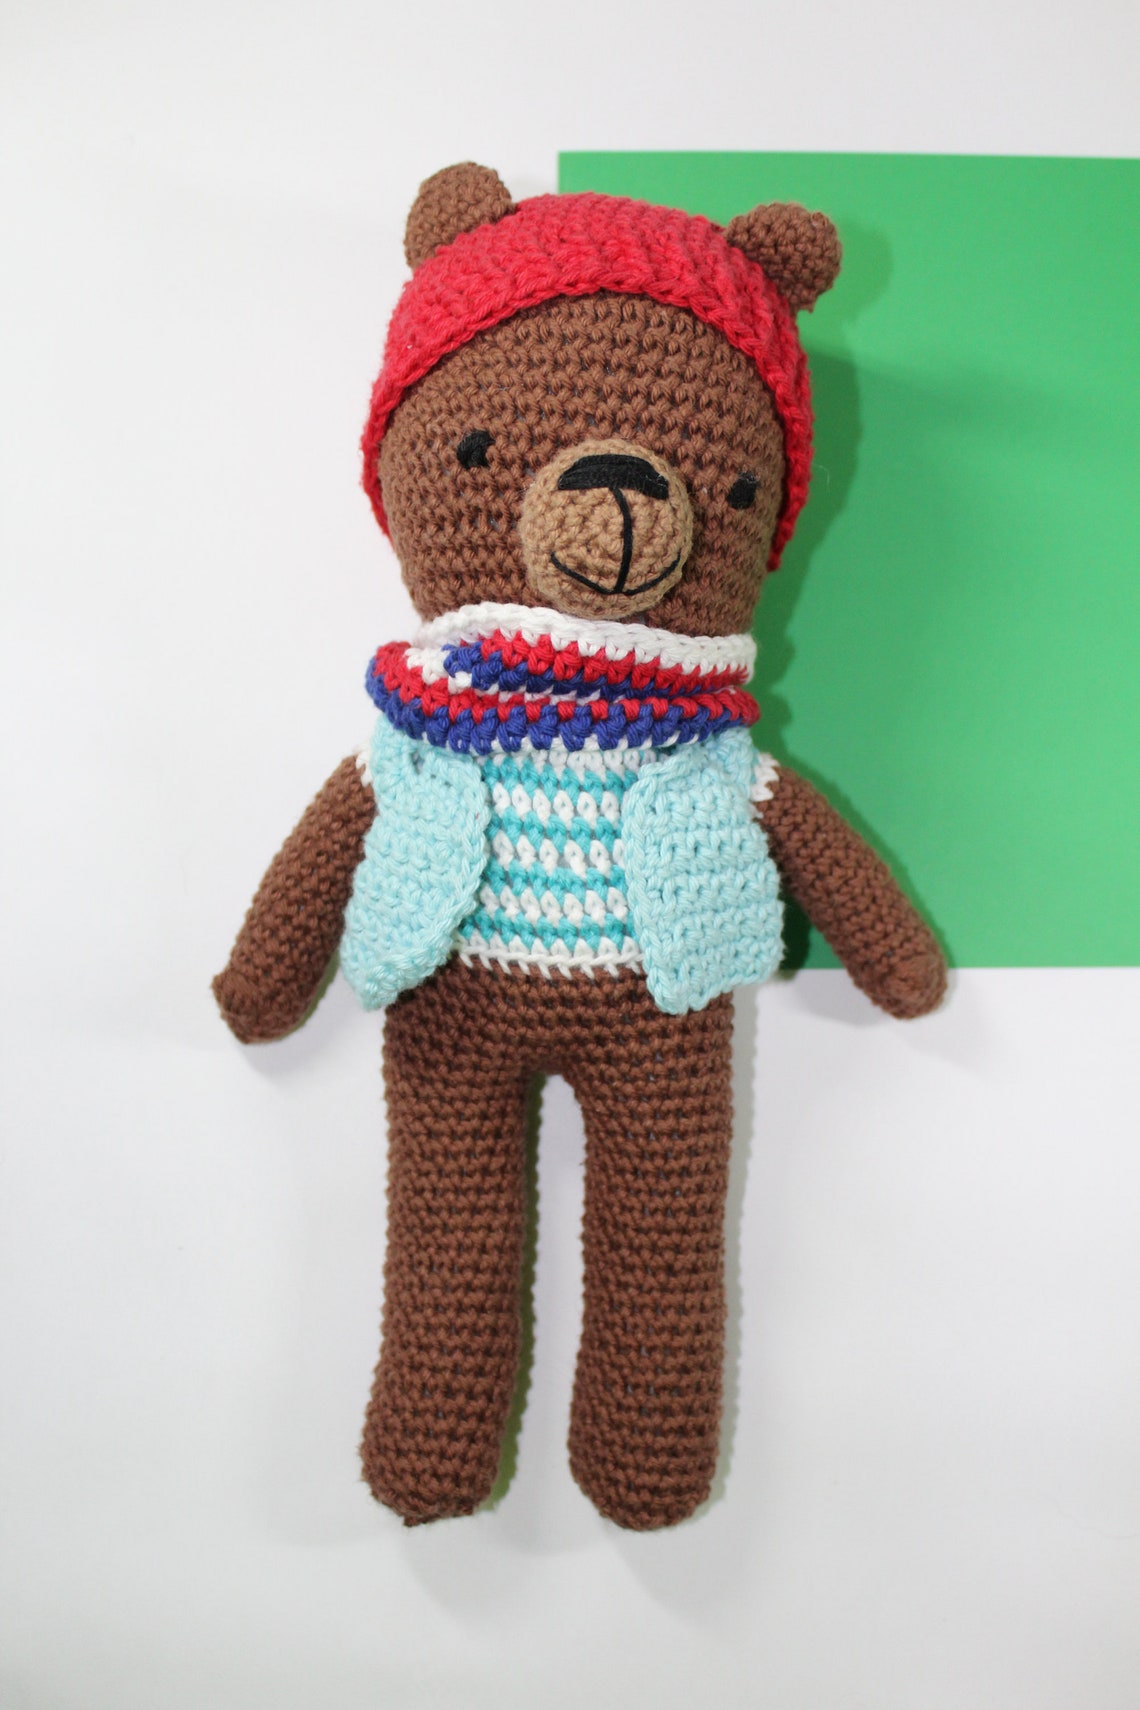 Hans Grizzly Bear Amigurumi Crochet Toy MADE TO ORDER - Etsy